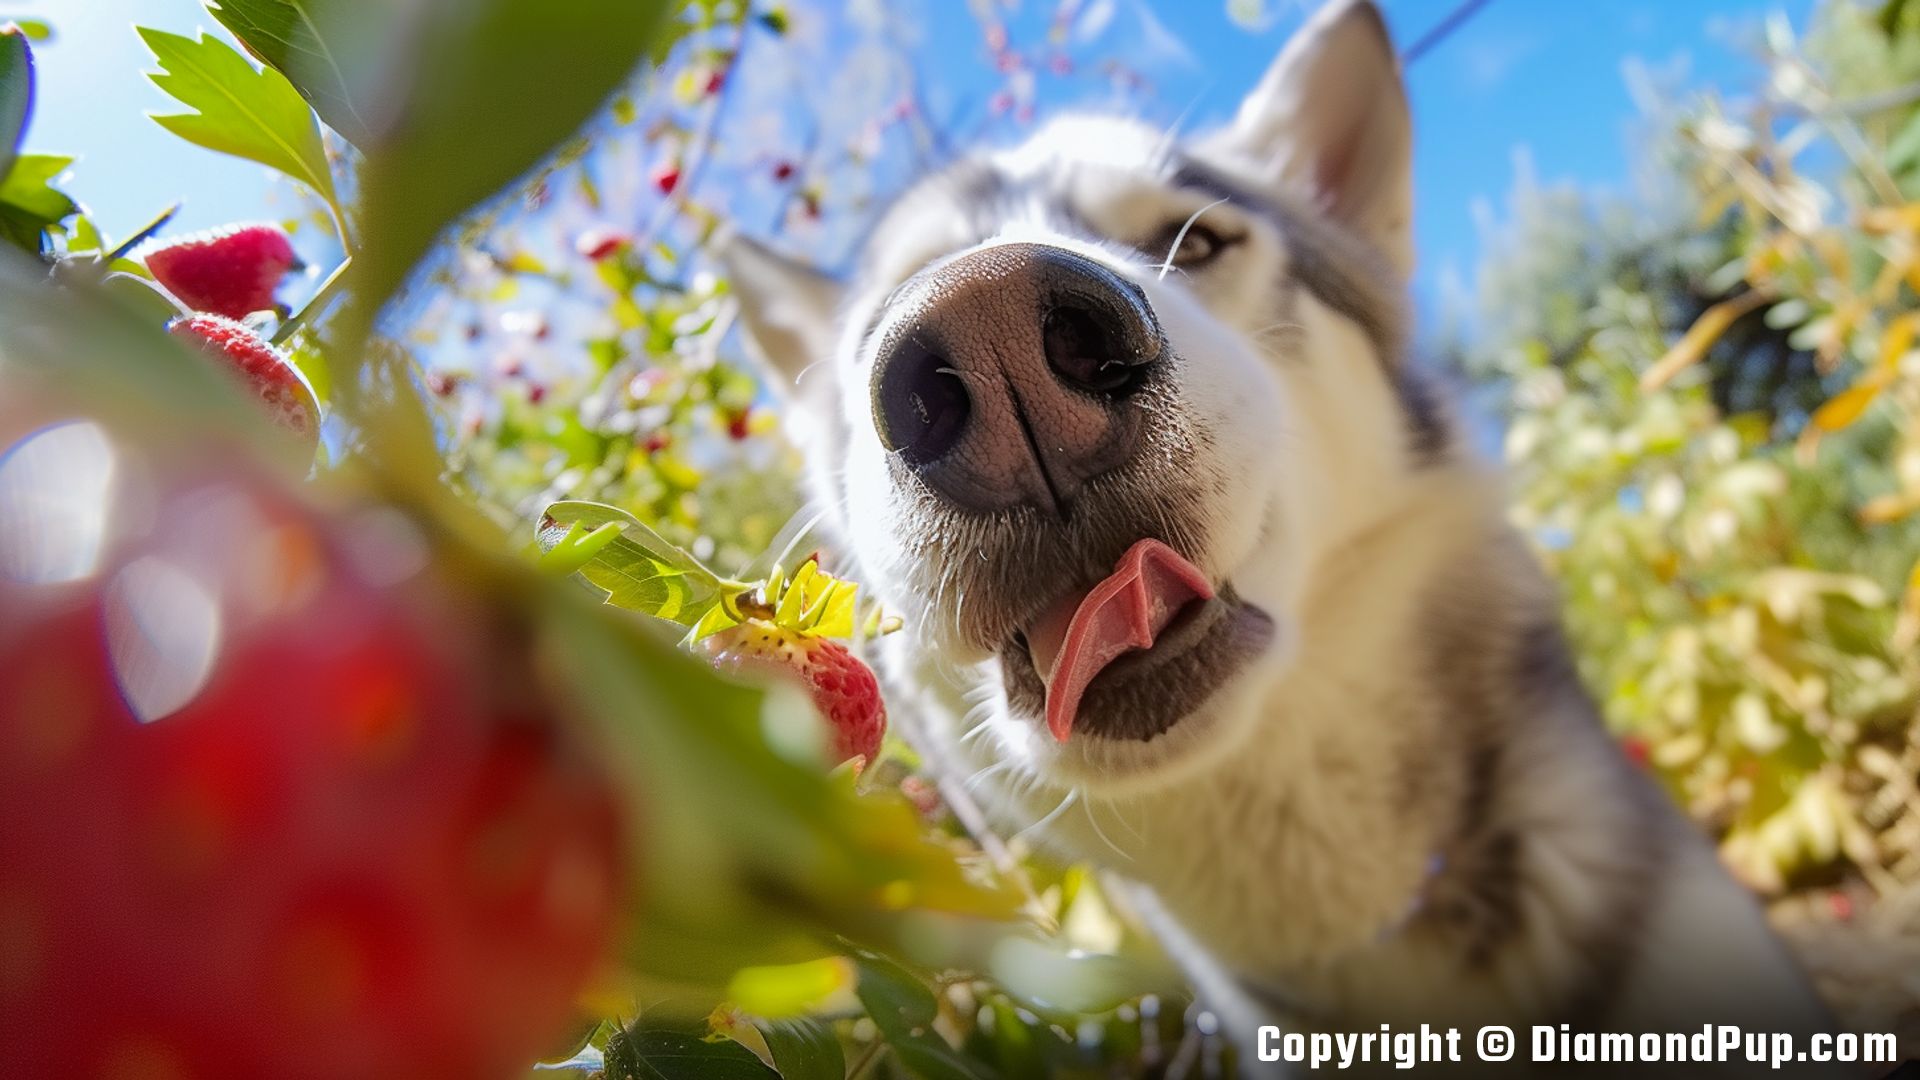 Photograph of a Cute Husky Eating Strawberries